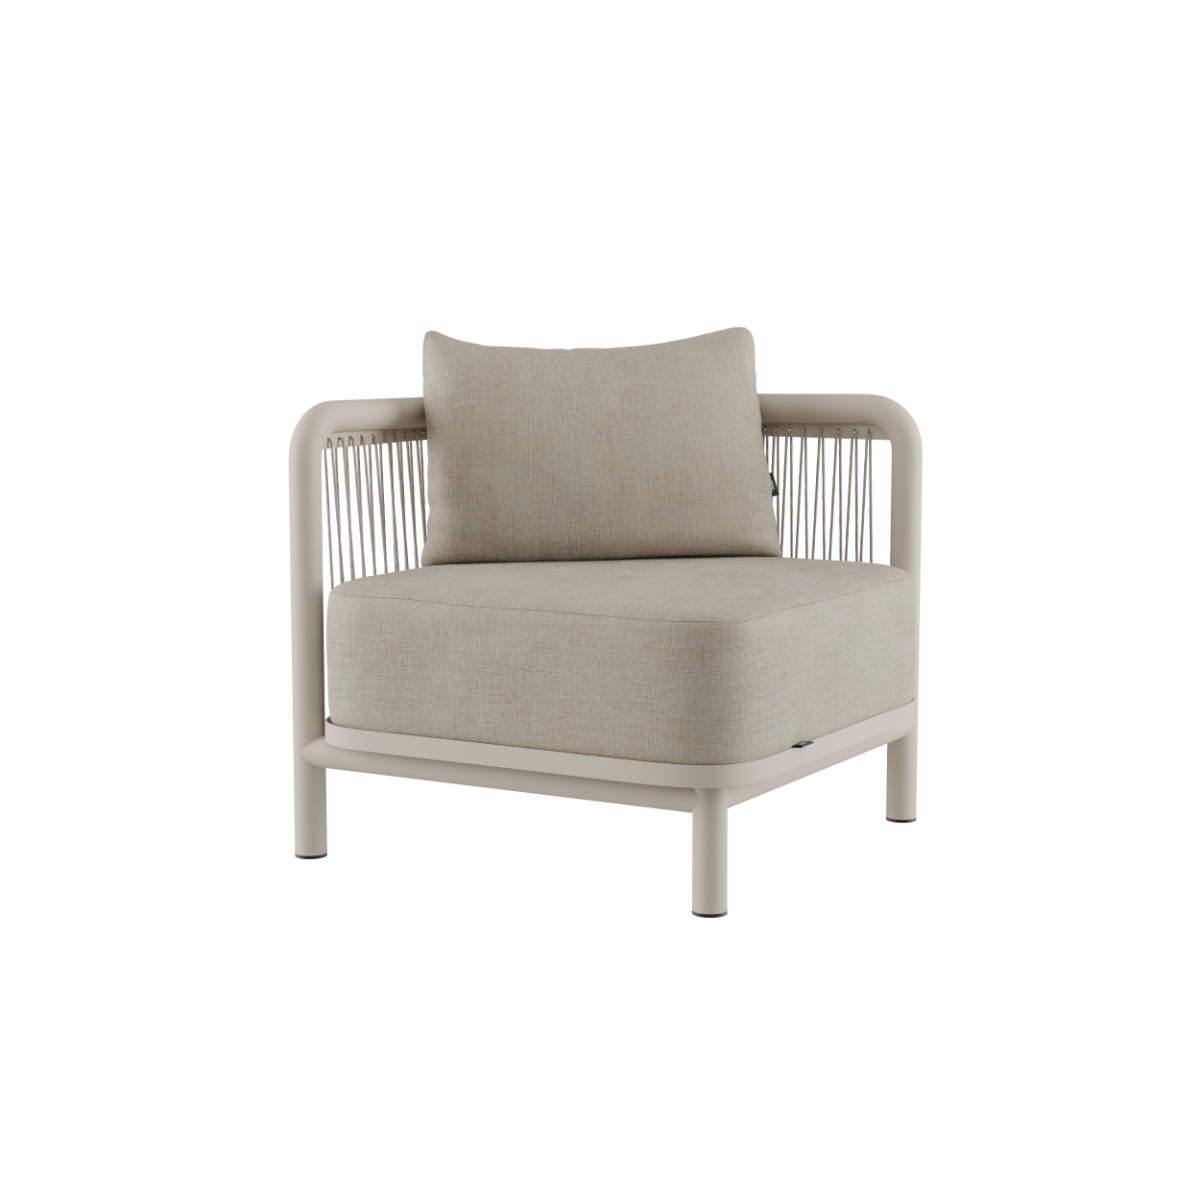 String Lounge Sofa - Corner section [Contract]